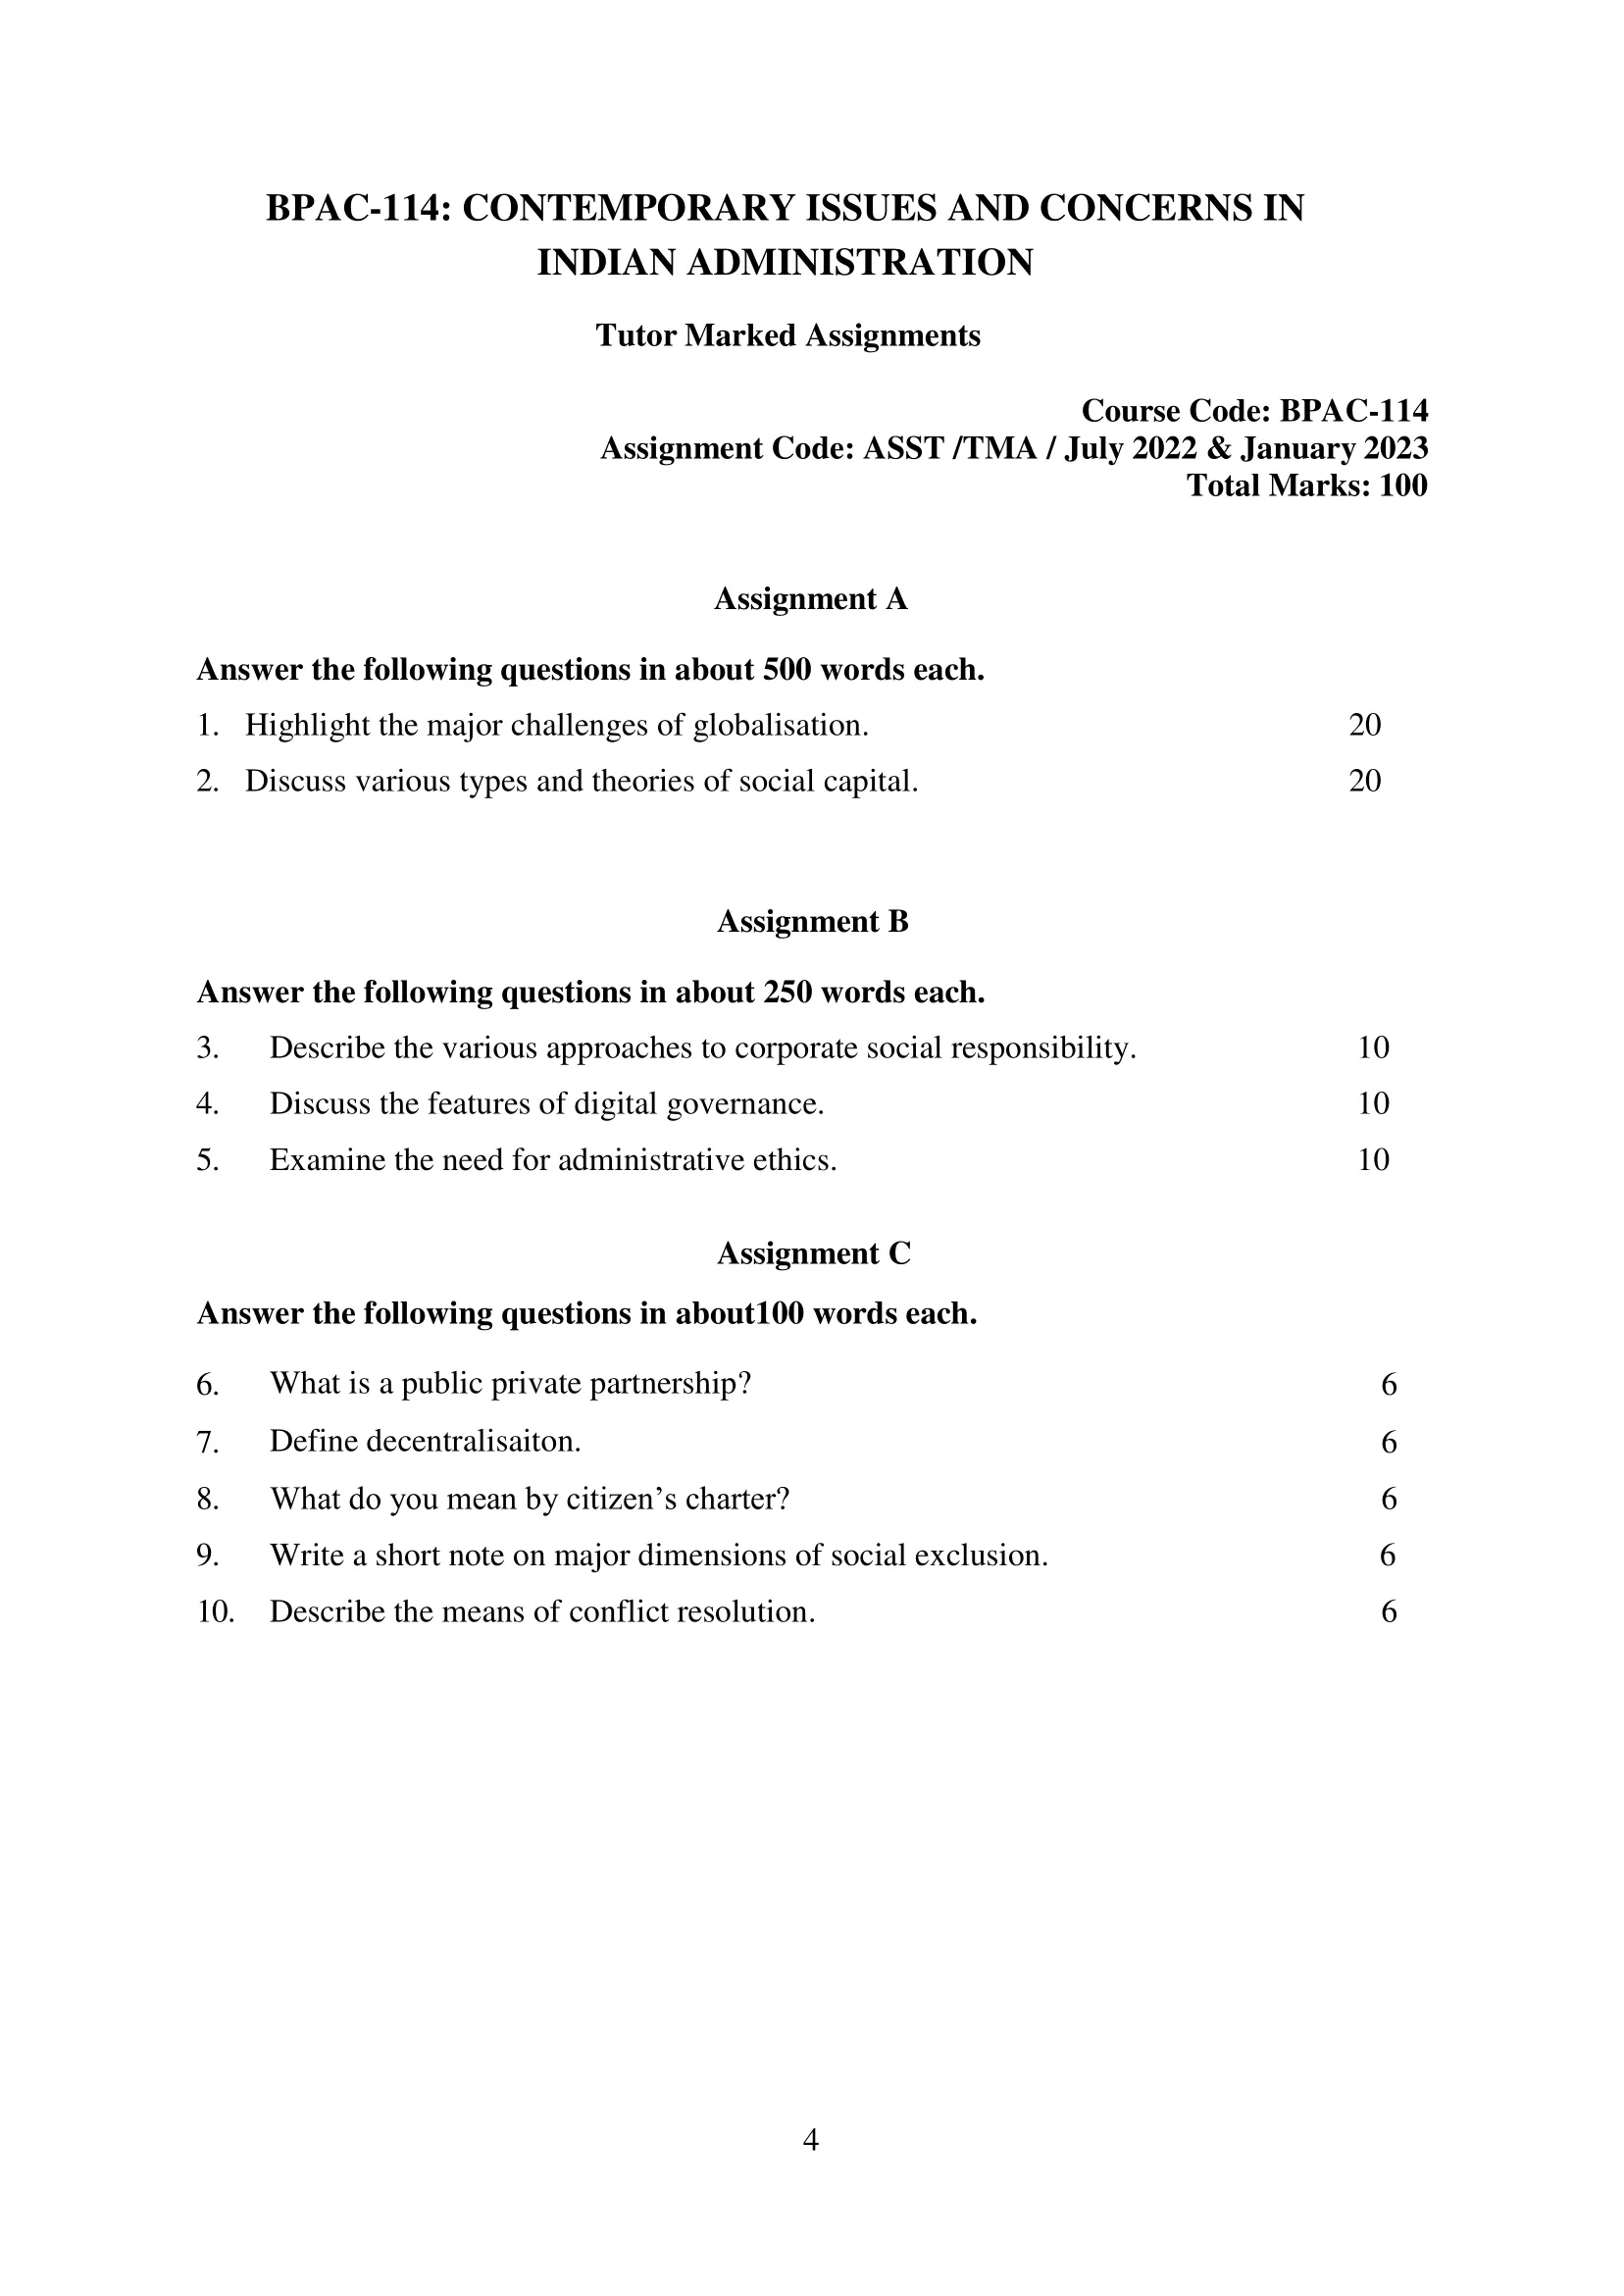 BPAC-114 IGNOU BAG Solved Assignment-CONTEMPORARY ISSUES AND CONCERNS IN INDIAN ADMINISTRATION